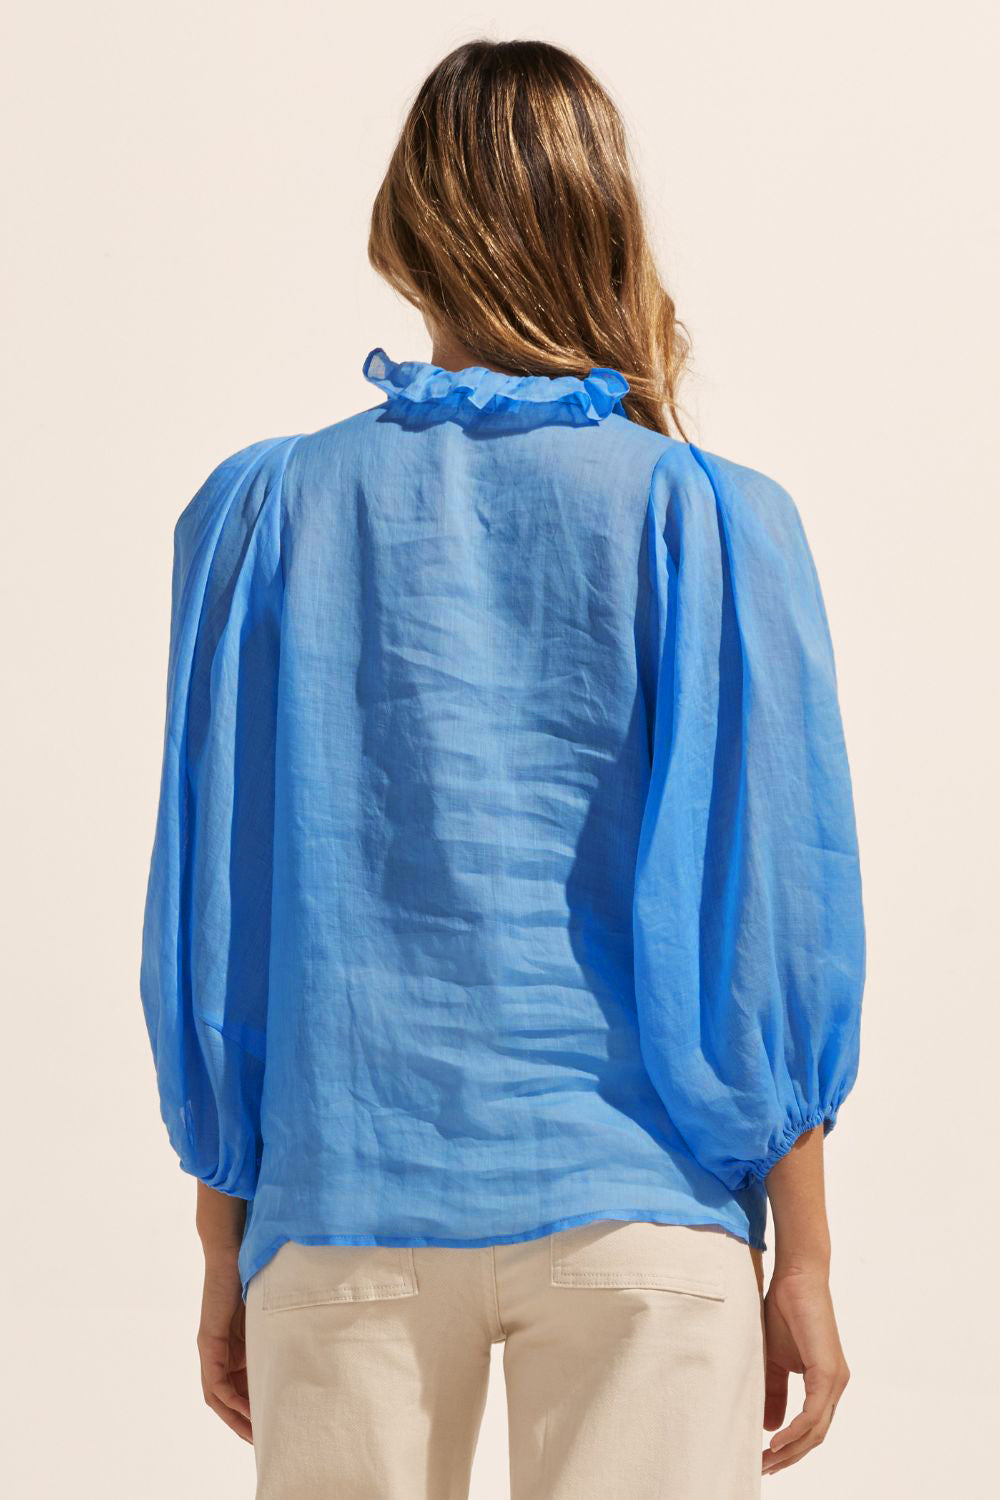 blue, ruffle neck collar, buttons down centre, mid length sleeve, shirt, back view